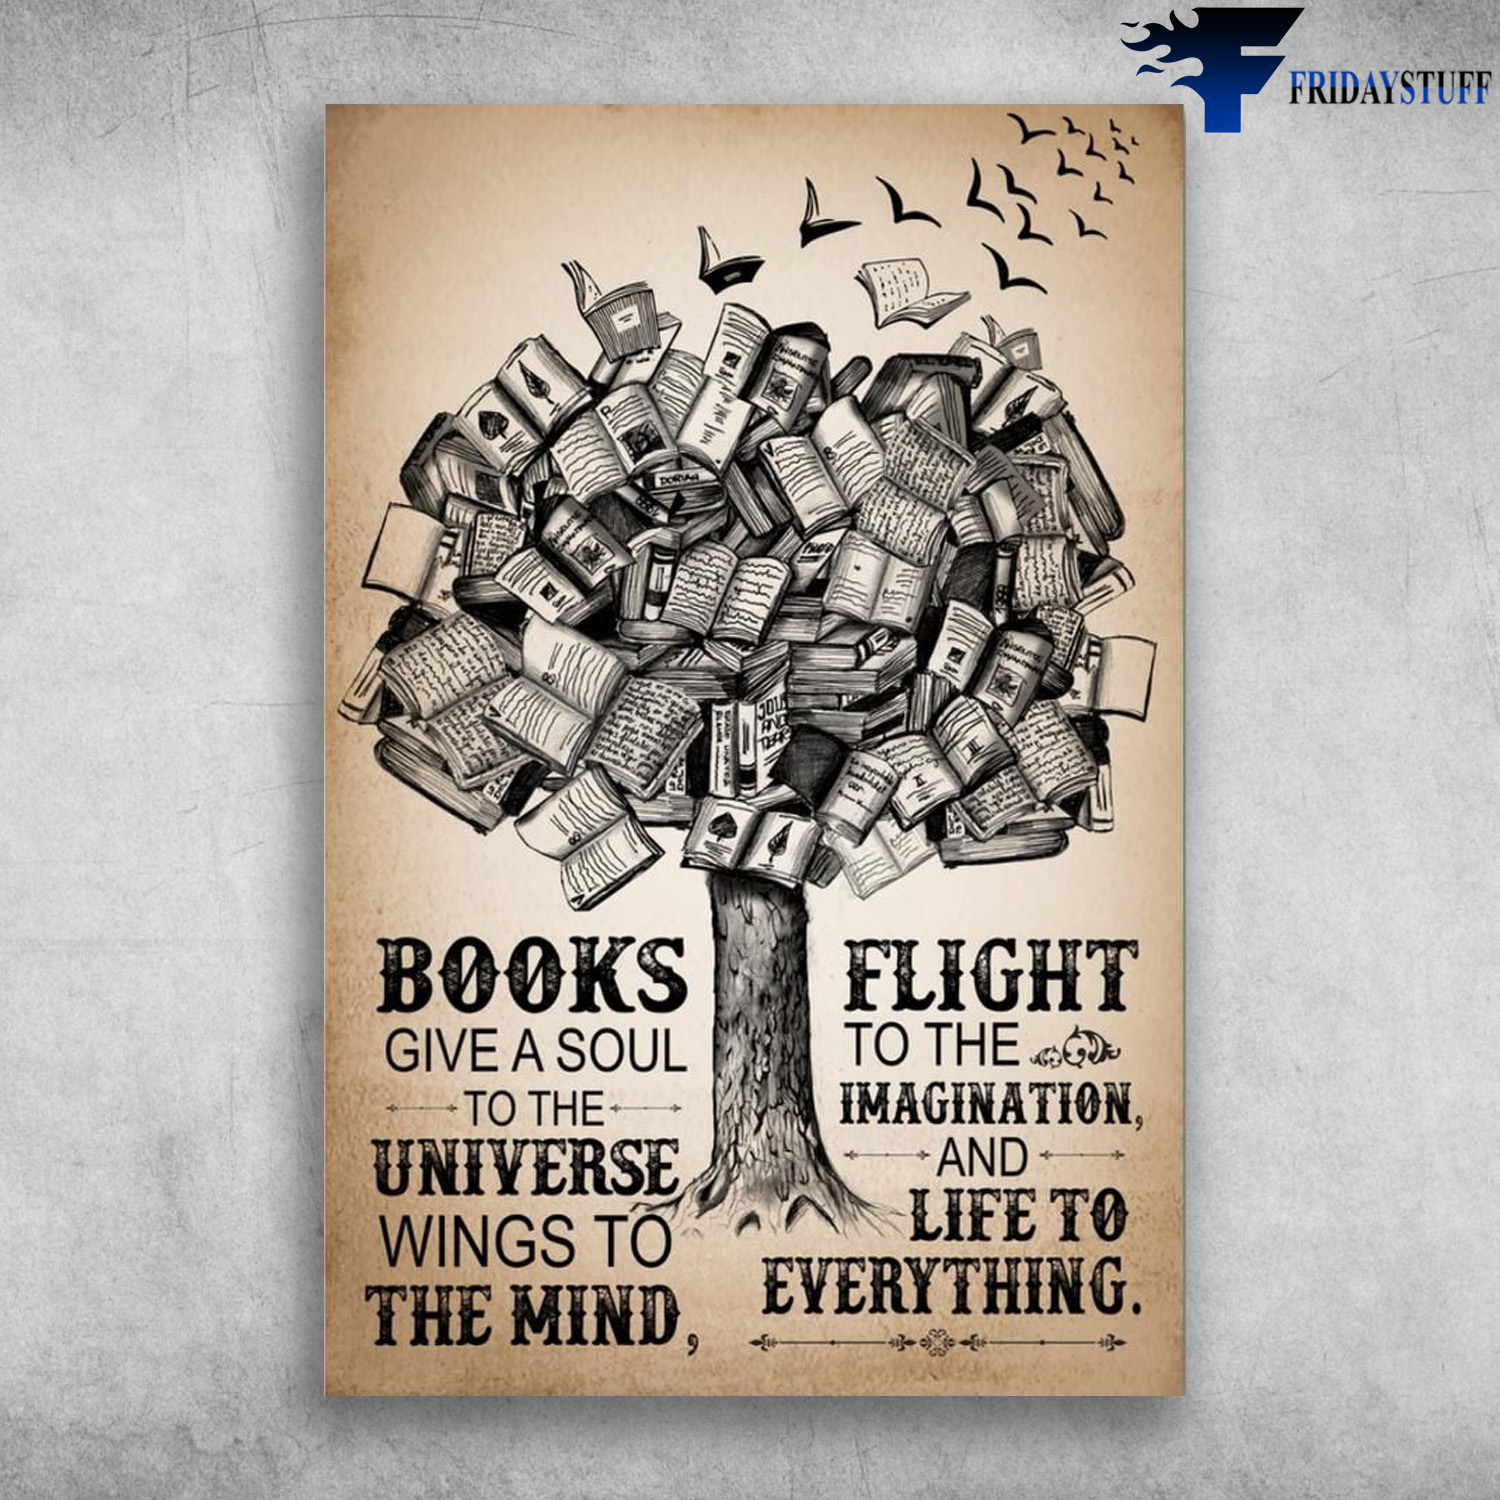 The Book Tree - Books Give A Soul To The Universe Wings To The Mind, Flight To The Imaginetion, And Life To Everything